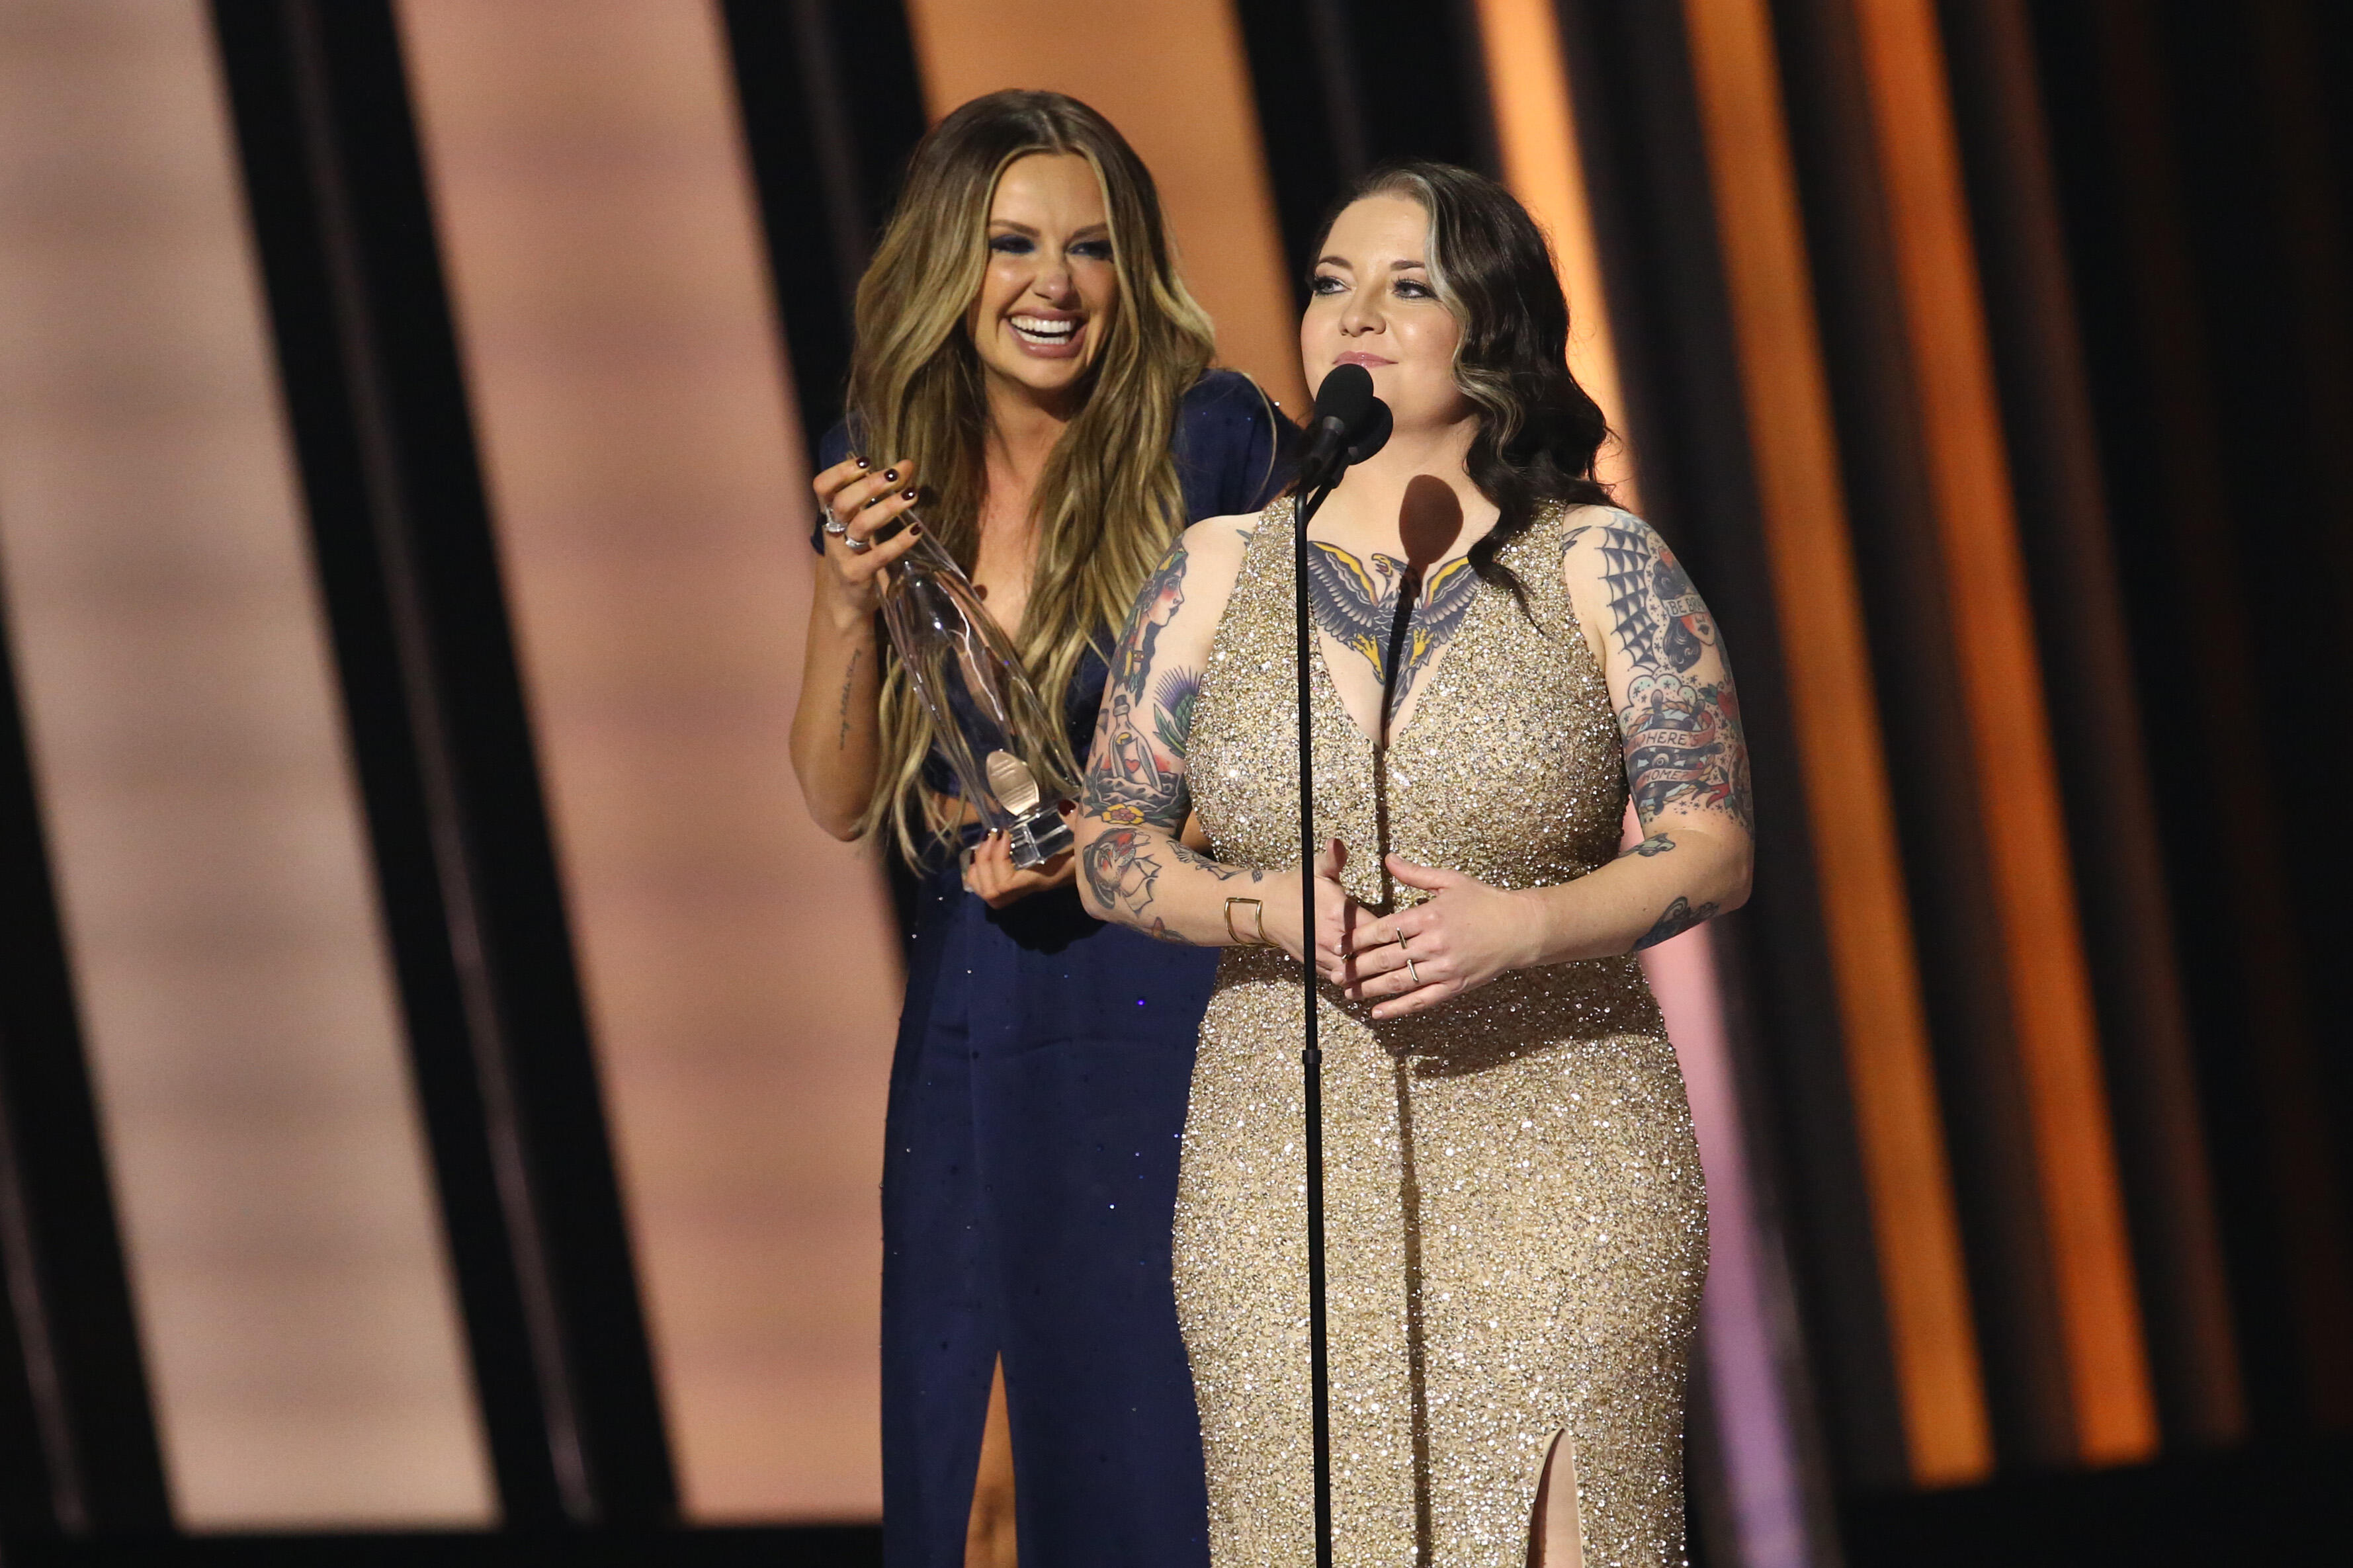 Ashley McBryde Steps In To Translate For Shocked Carly Pearce After CMA